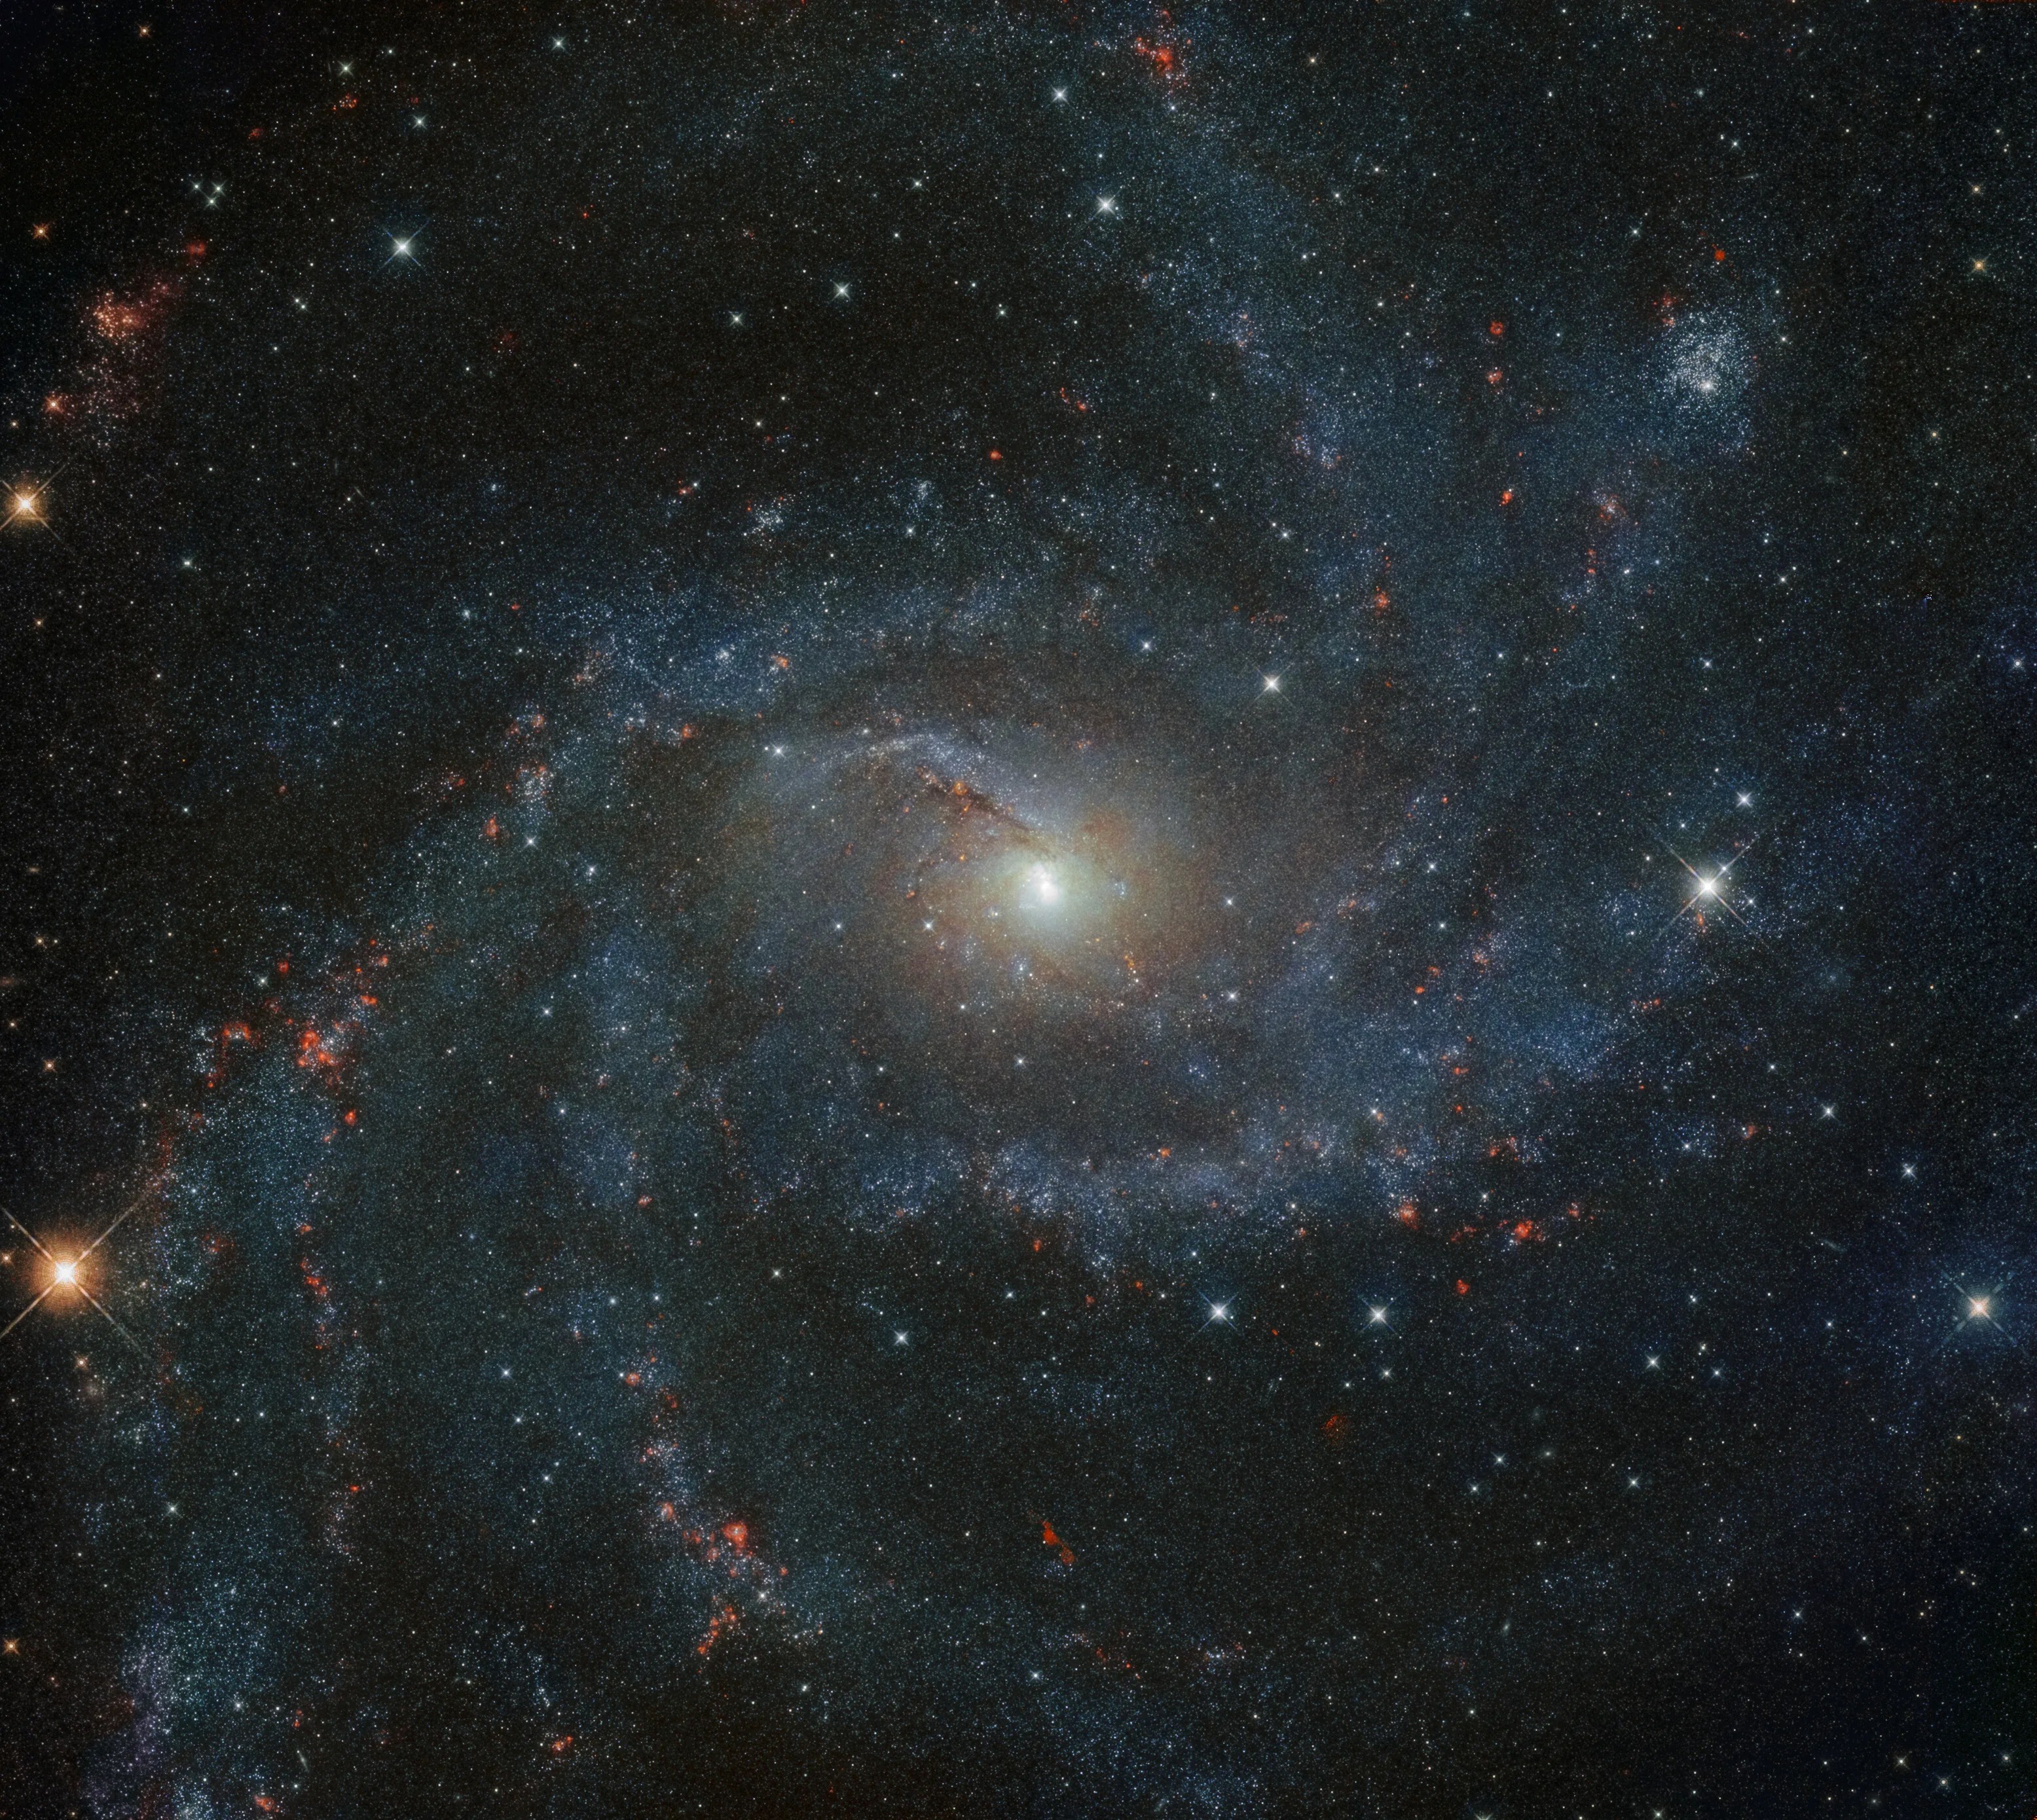 The galaxy ngc 6946 is nothing short of spectacular.